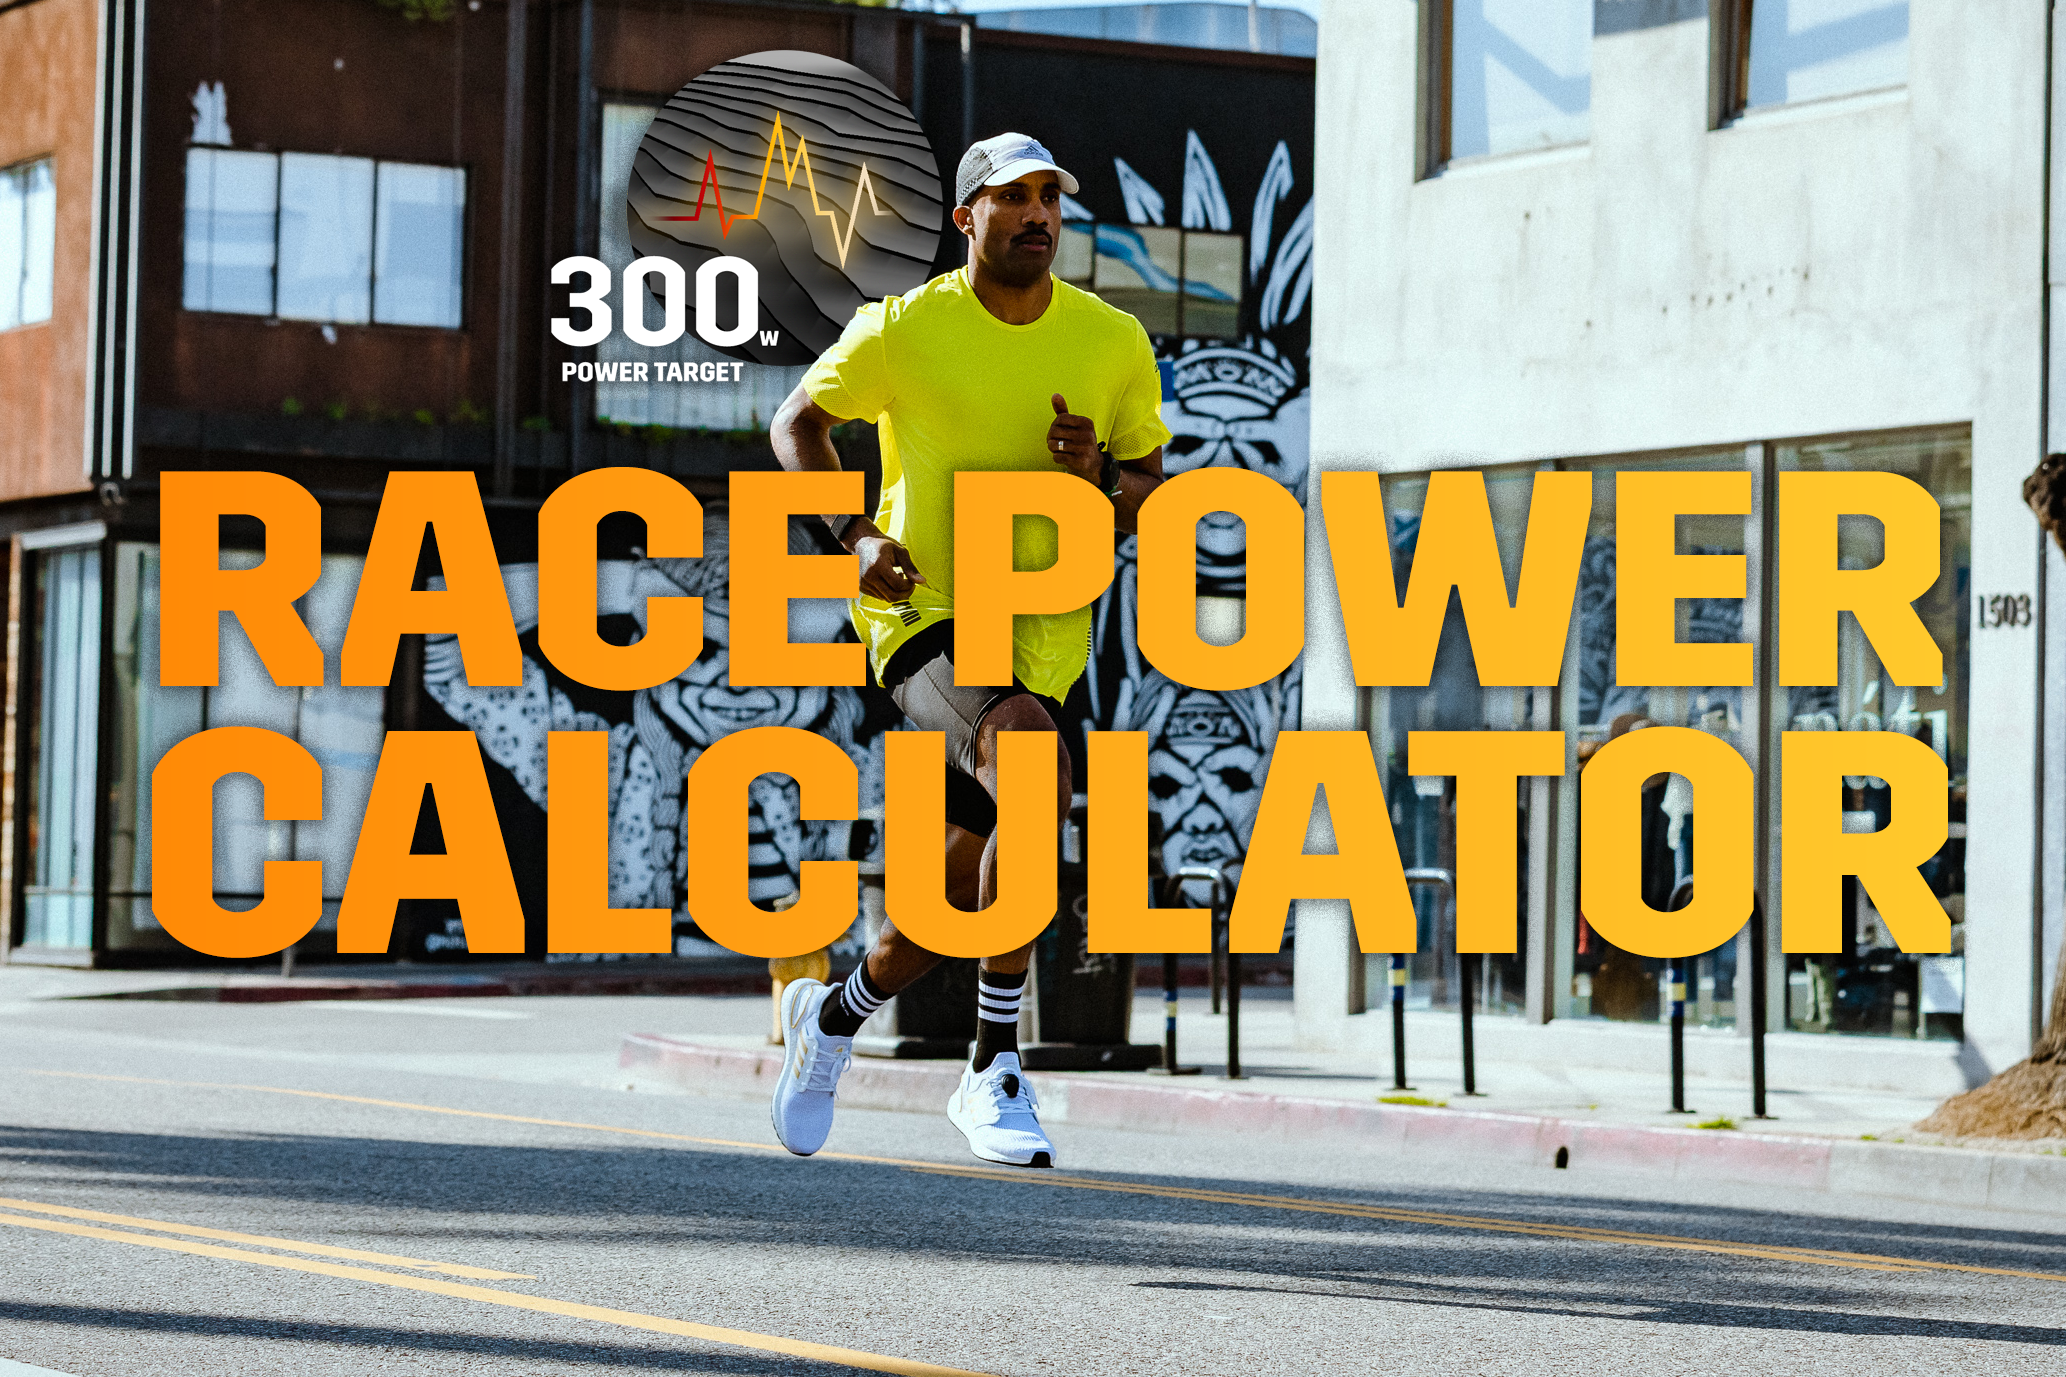 At your next A race, you will be certain you can achieve your dream performance with the new Race Power Calculator